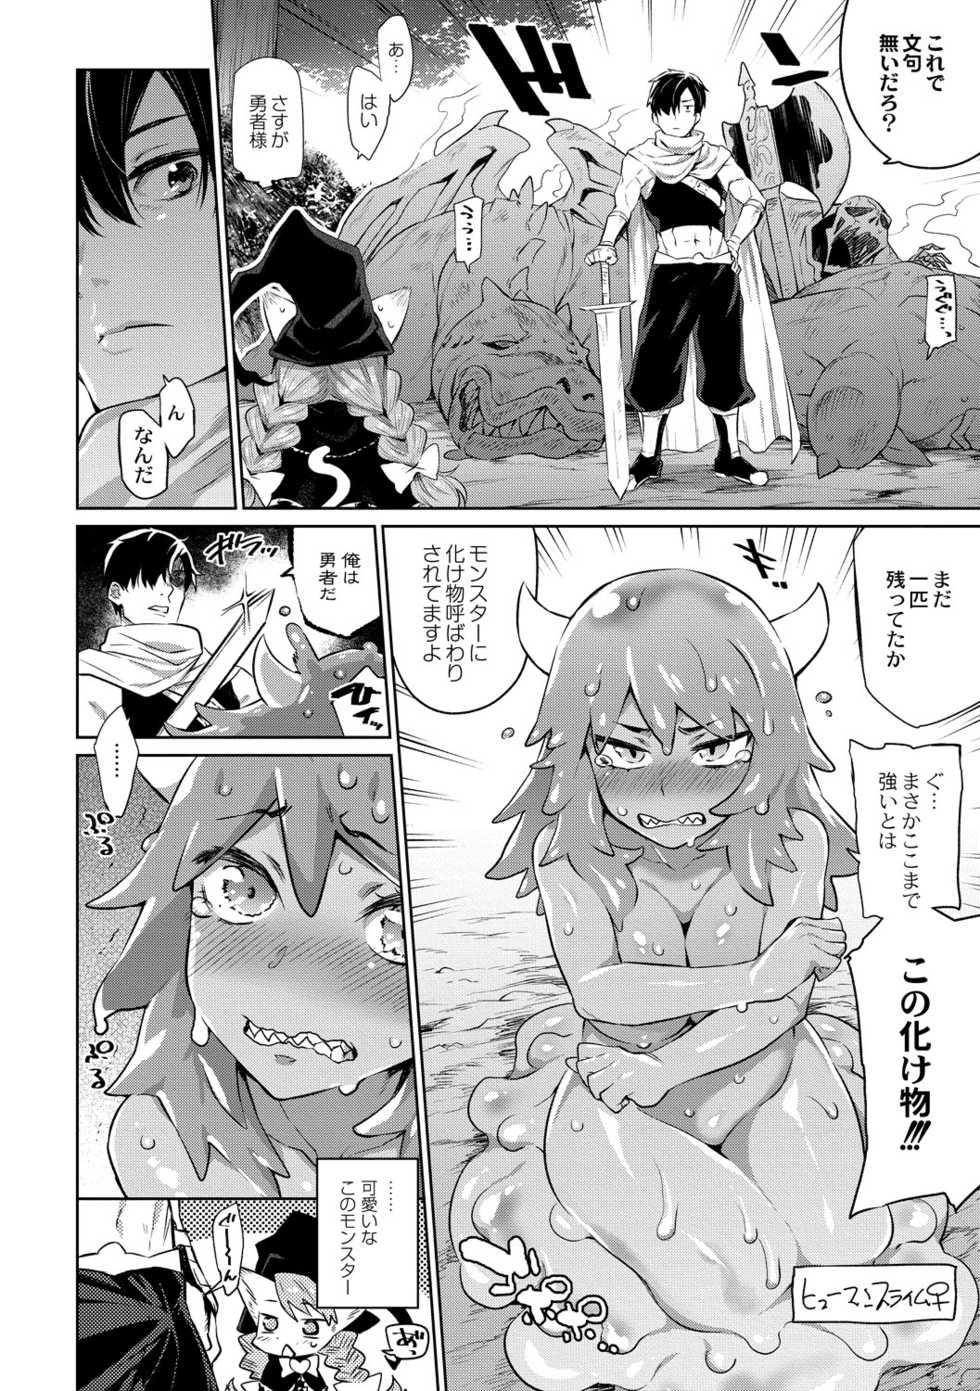 [Mizone] Monster Musume no Otoshikata - How to Corrupt a Monster Girl [Digital] - Page 15